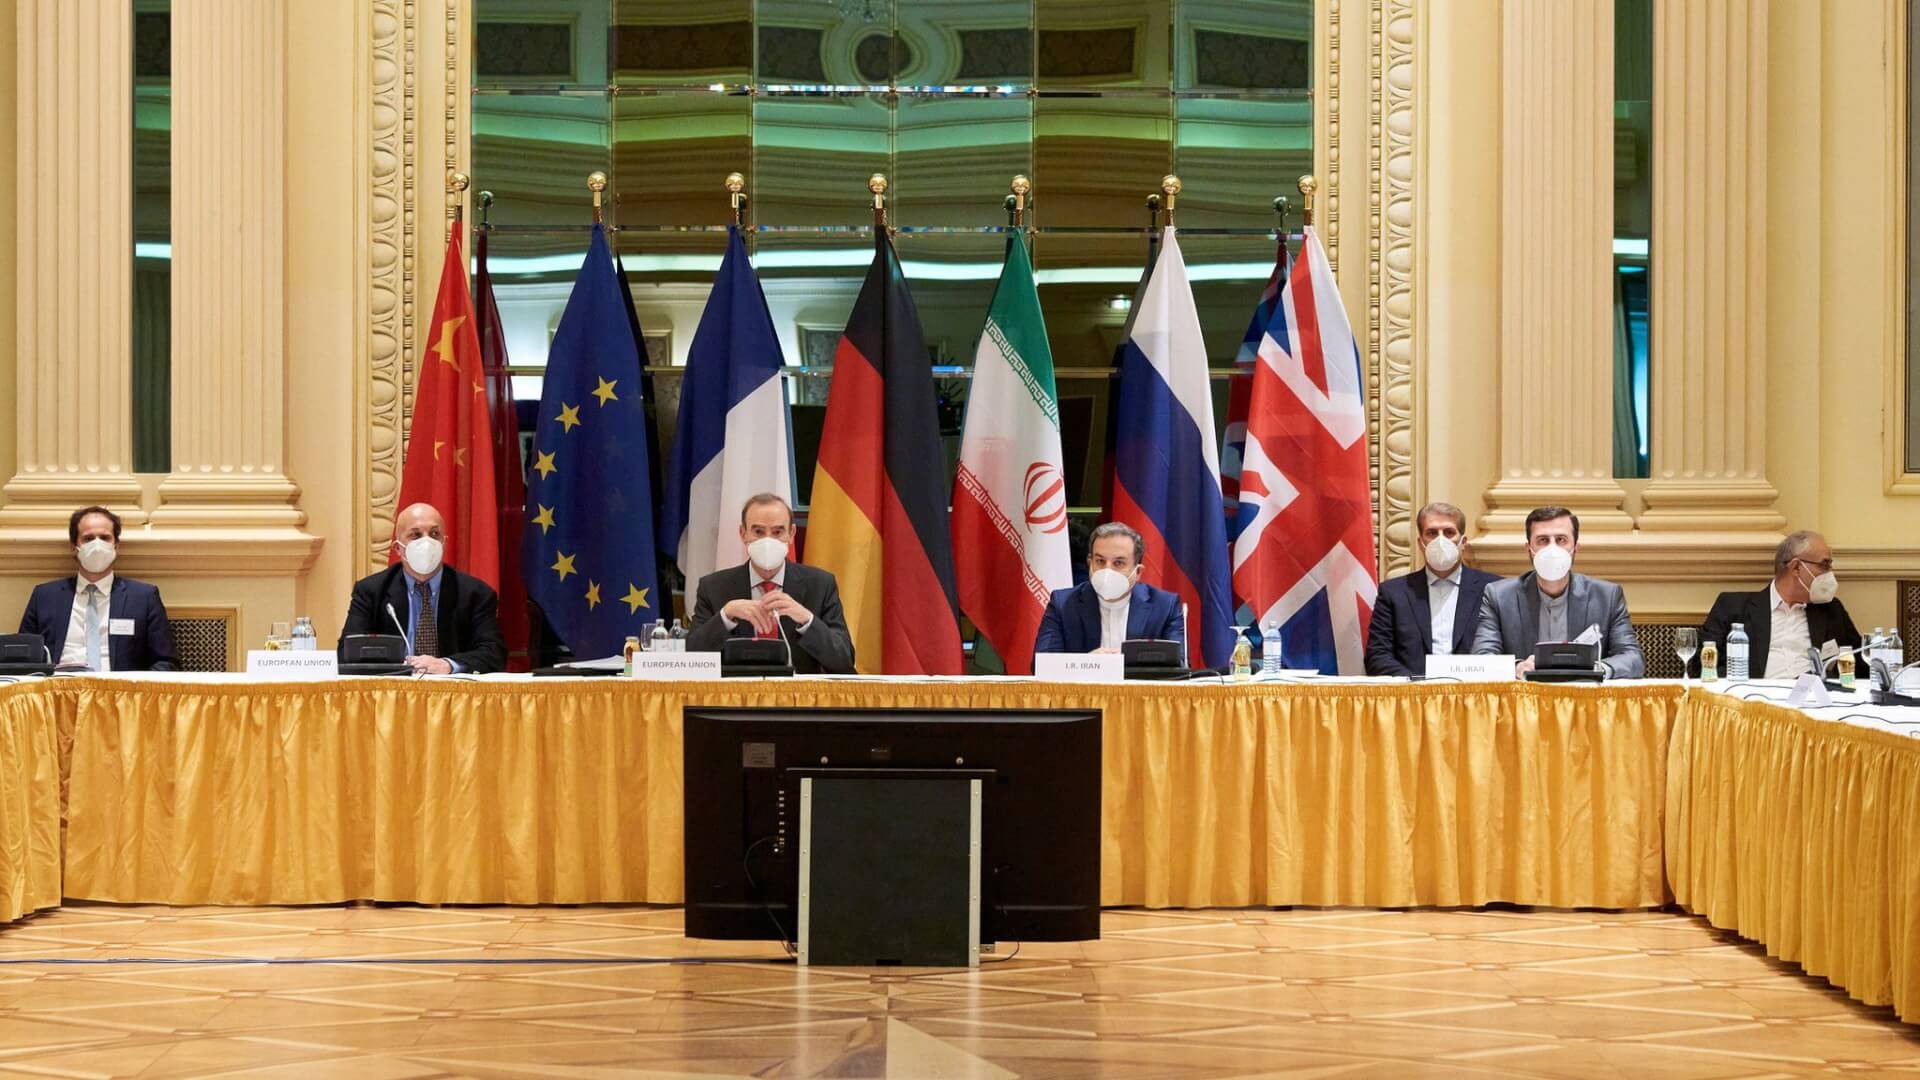 Vienna Talks: Iran Says Revival of JCPOA is Meaningless Without Removal of US Sanctions